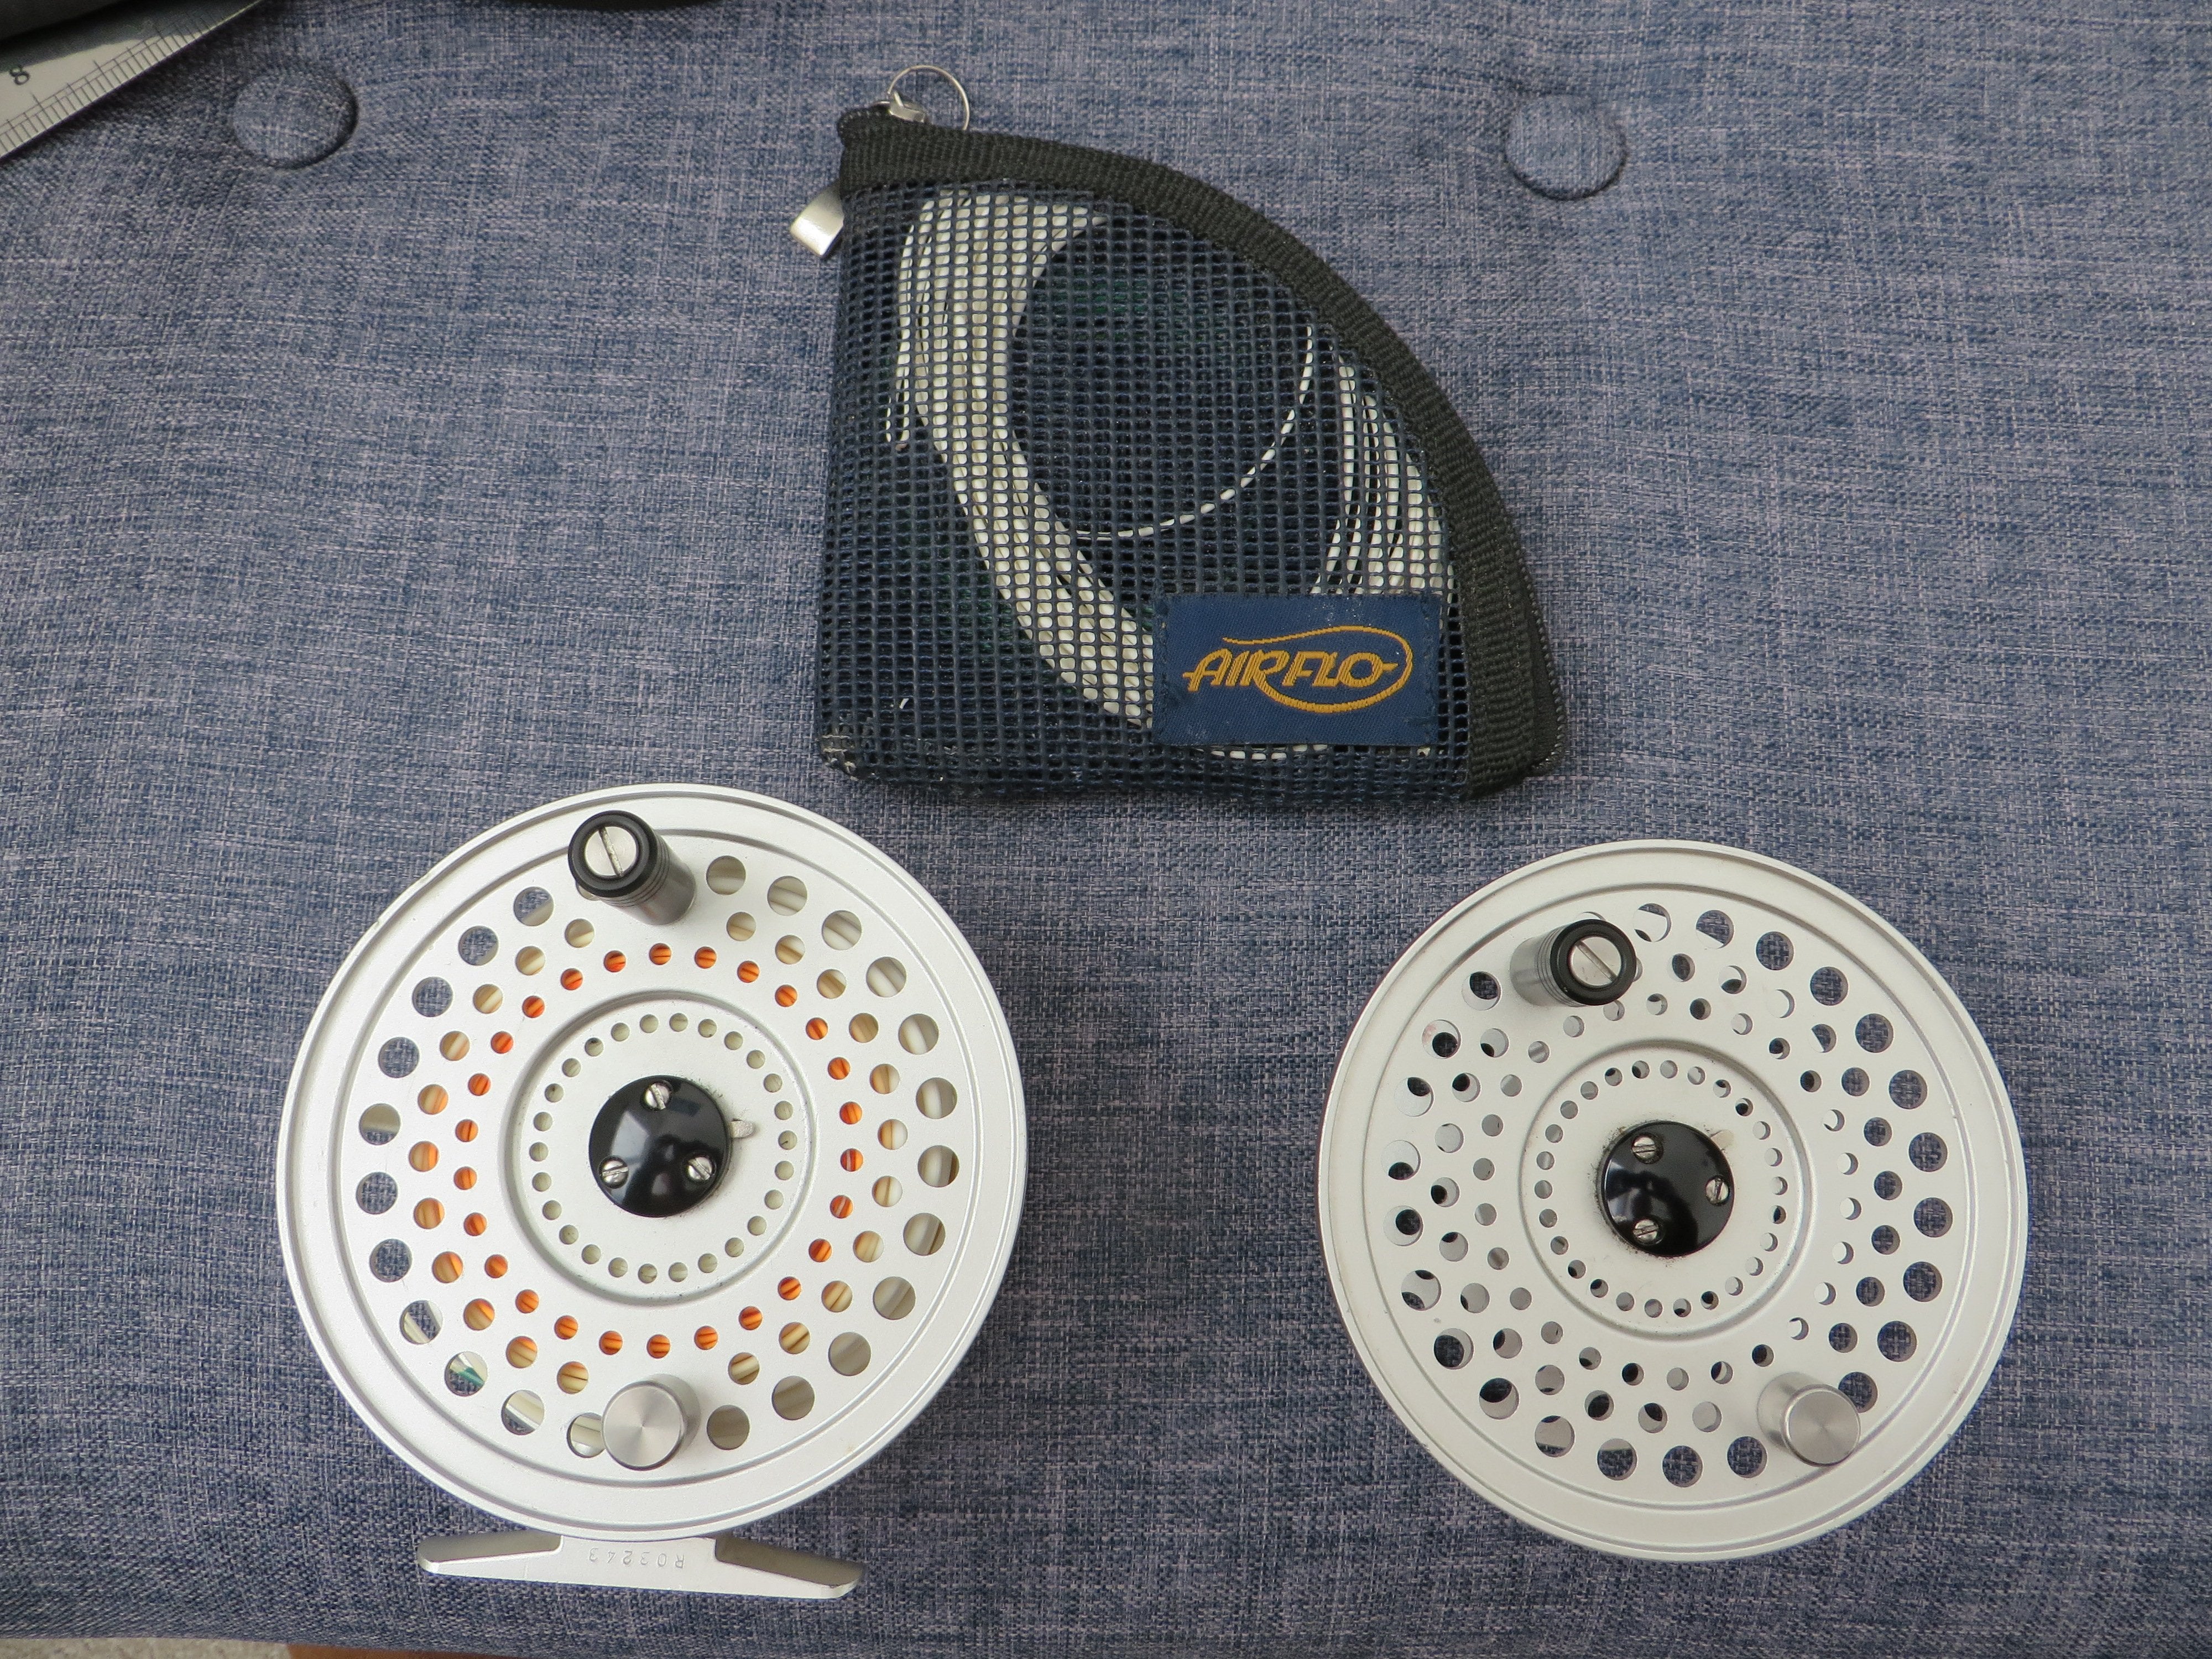 Hardy Uniqua Reel, spare spool, line and tips